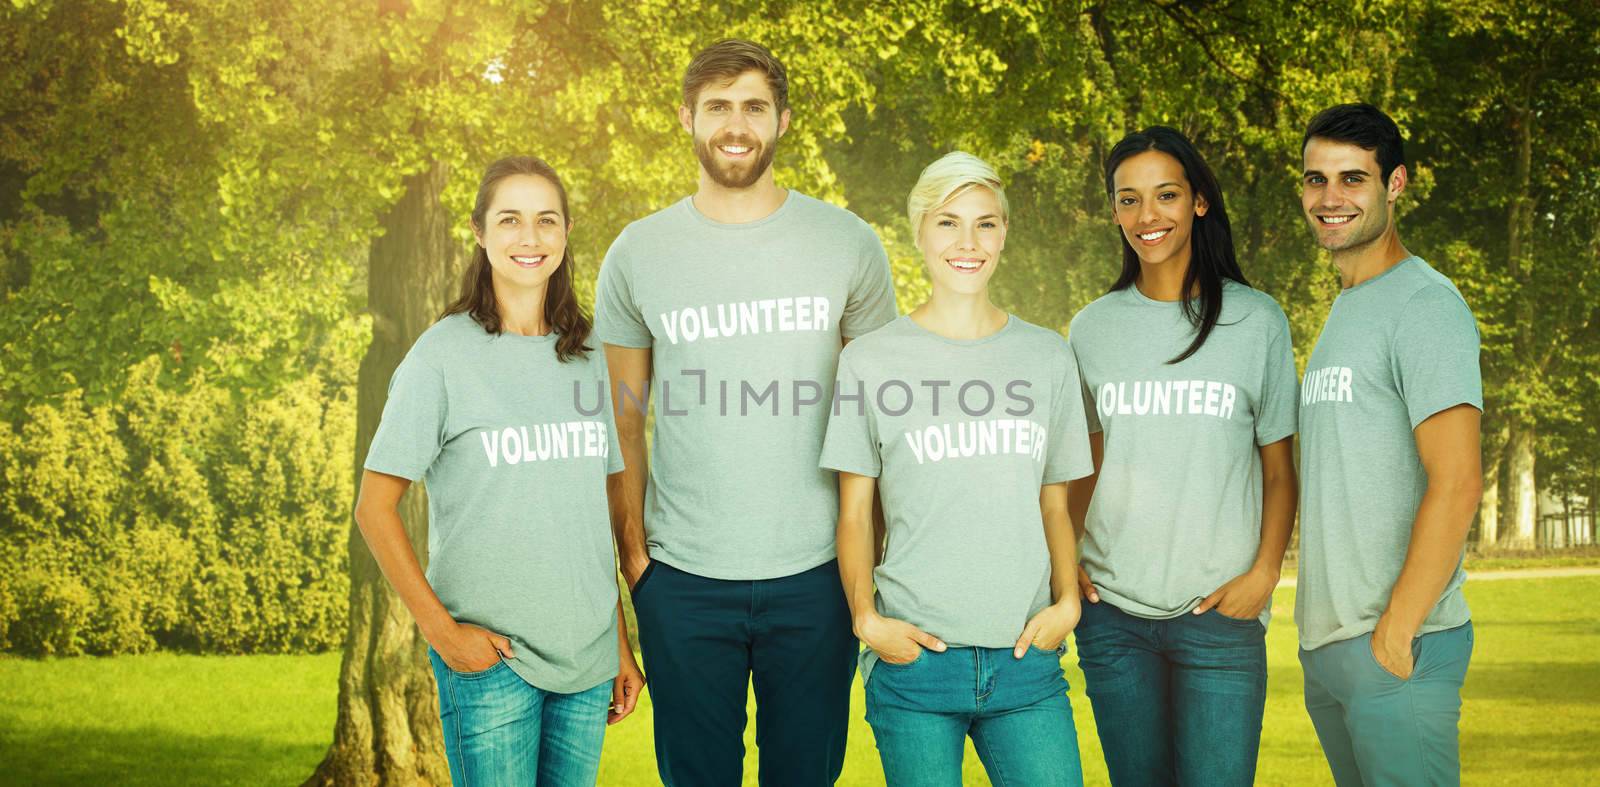 Volunteers friends smiling at the camera against trees and meadow